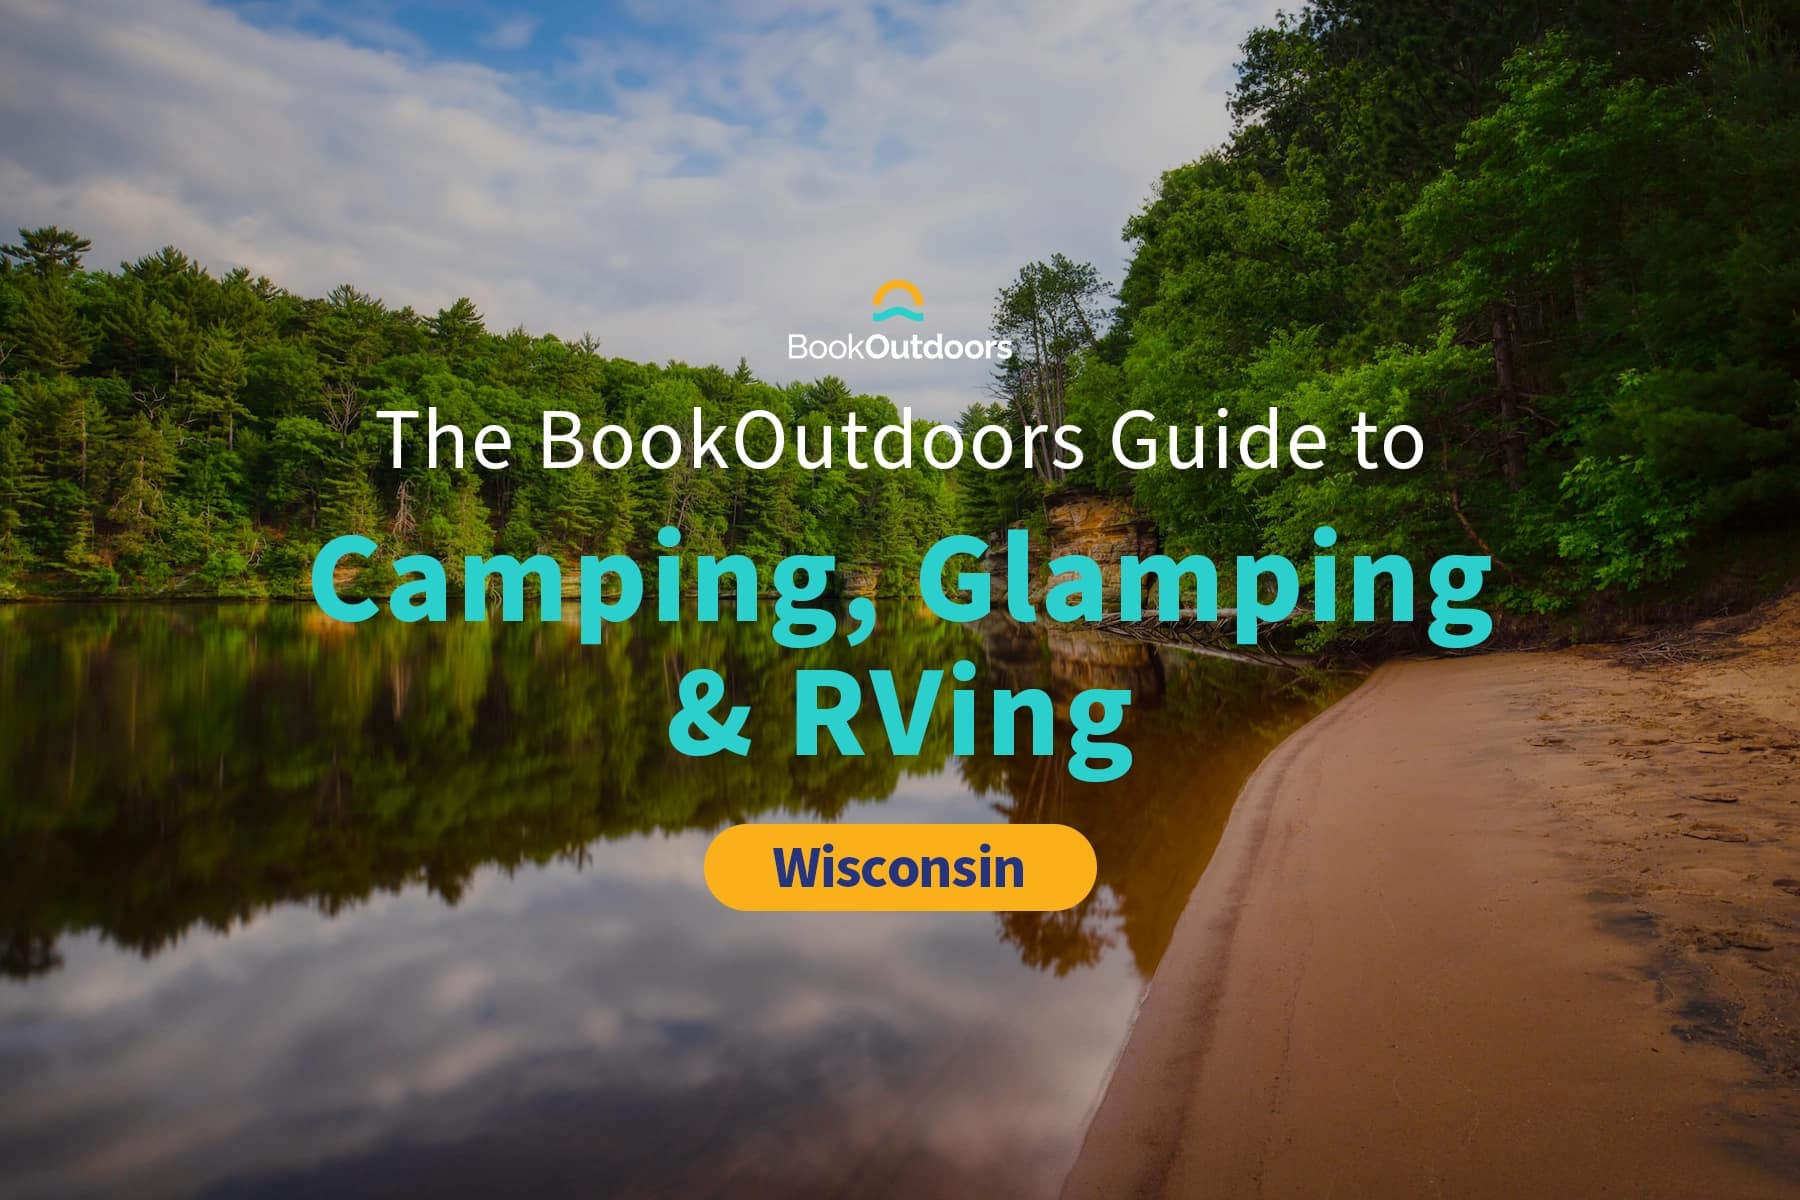 Image of Wisconsin Dells to convey the best camping in Wisconsin - BookOutdoors